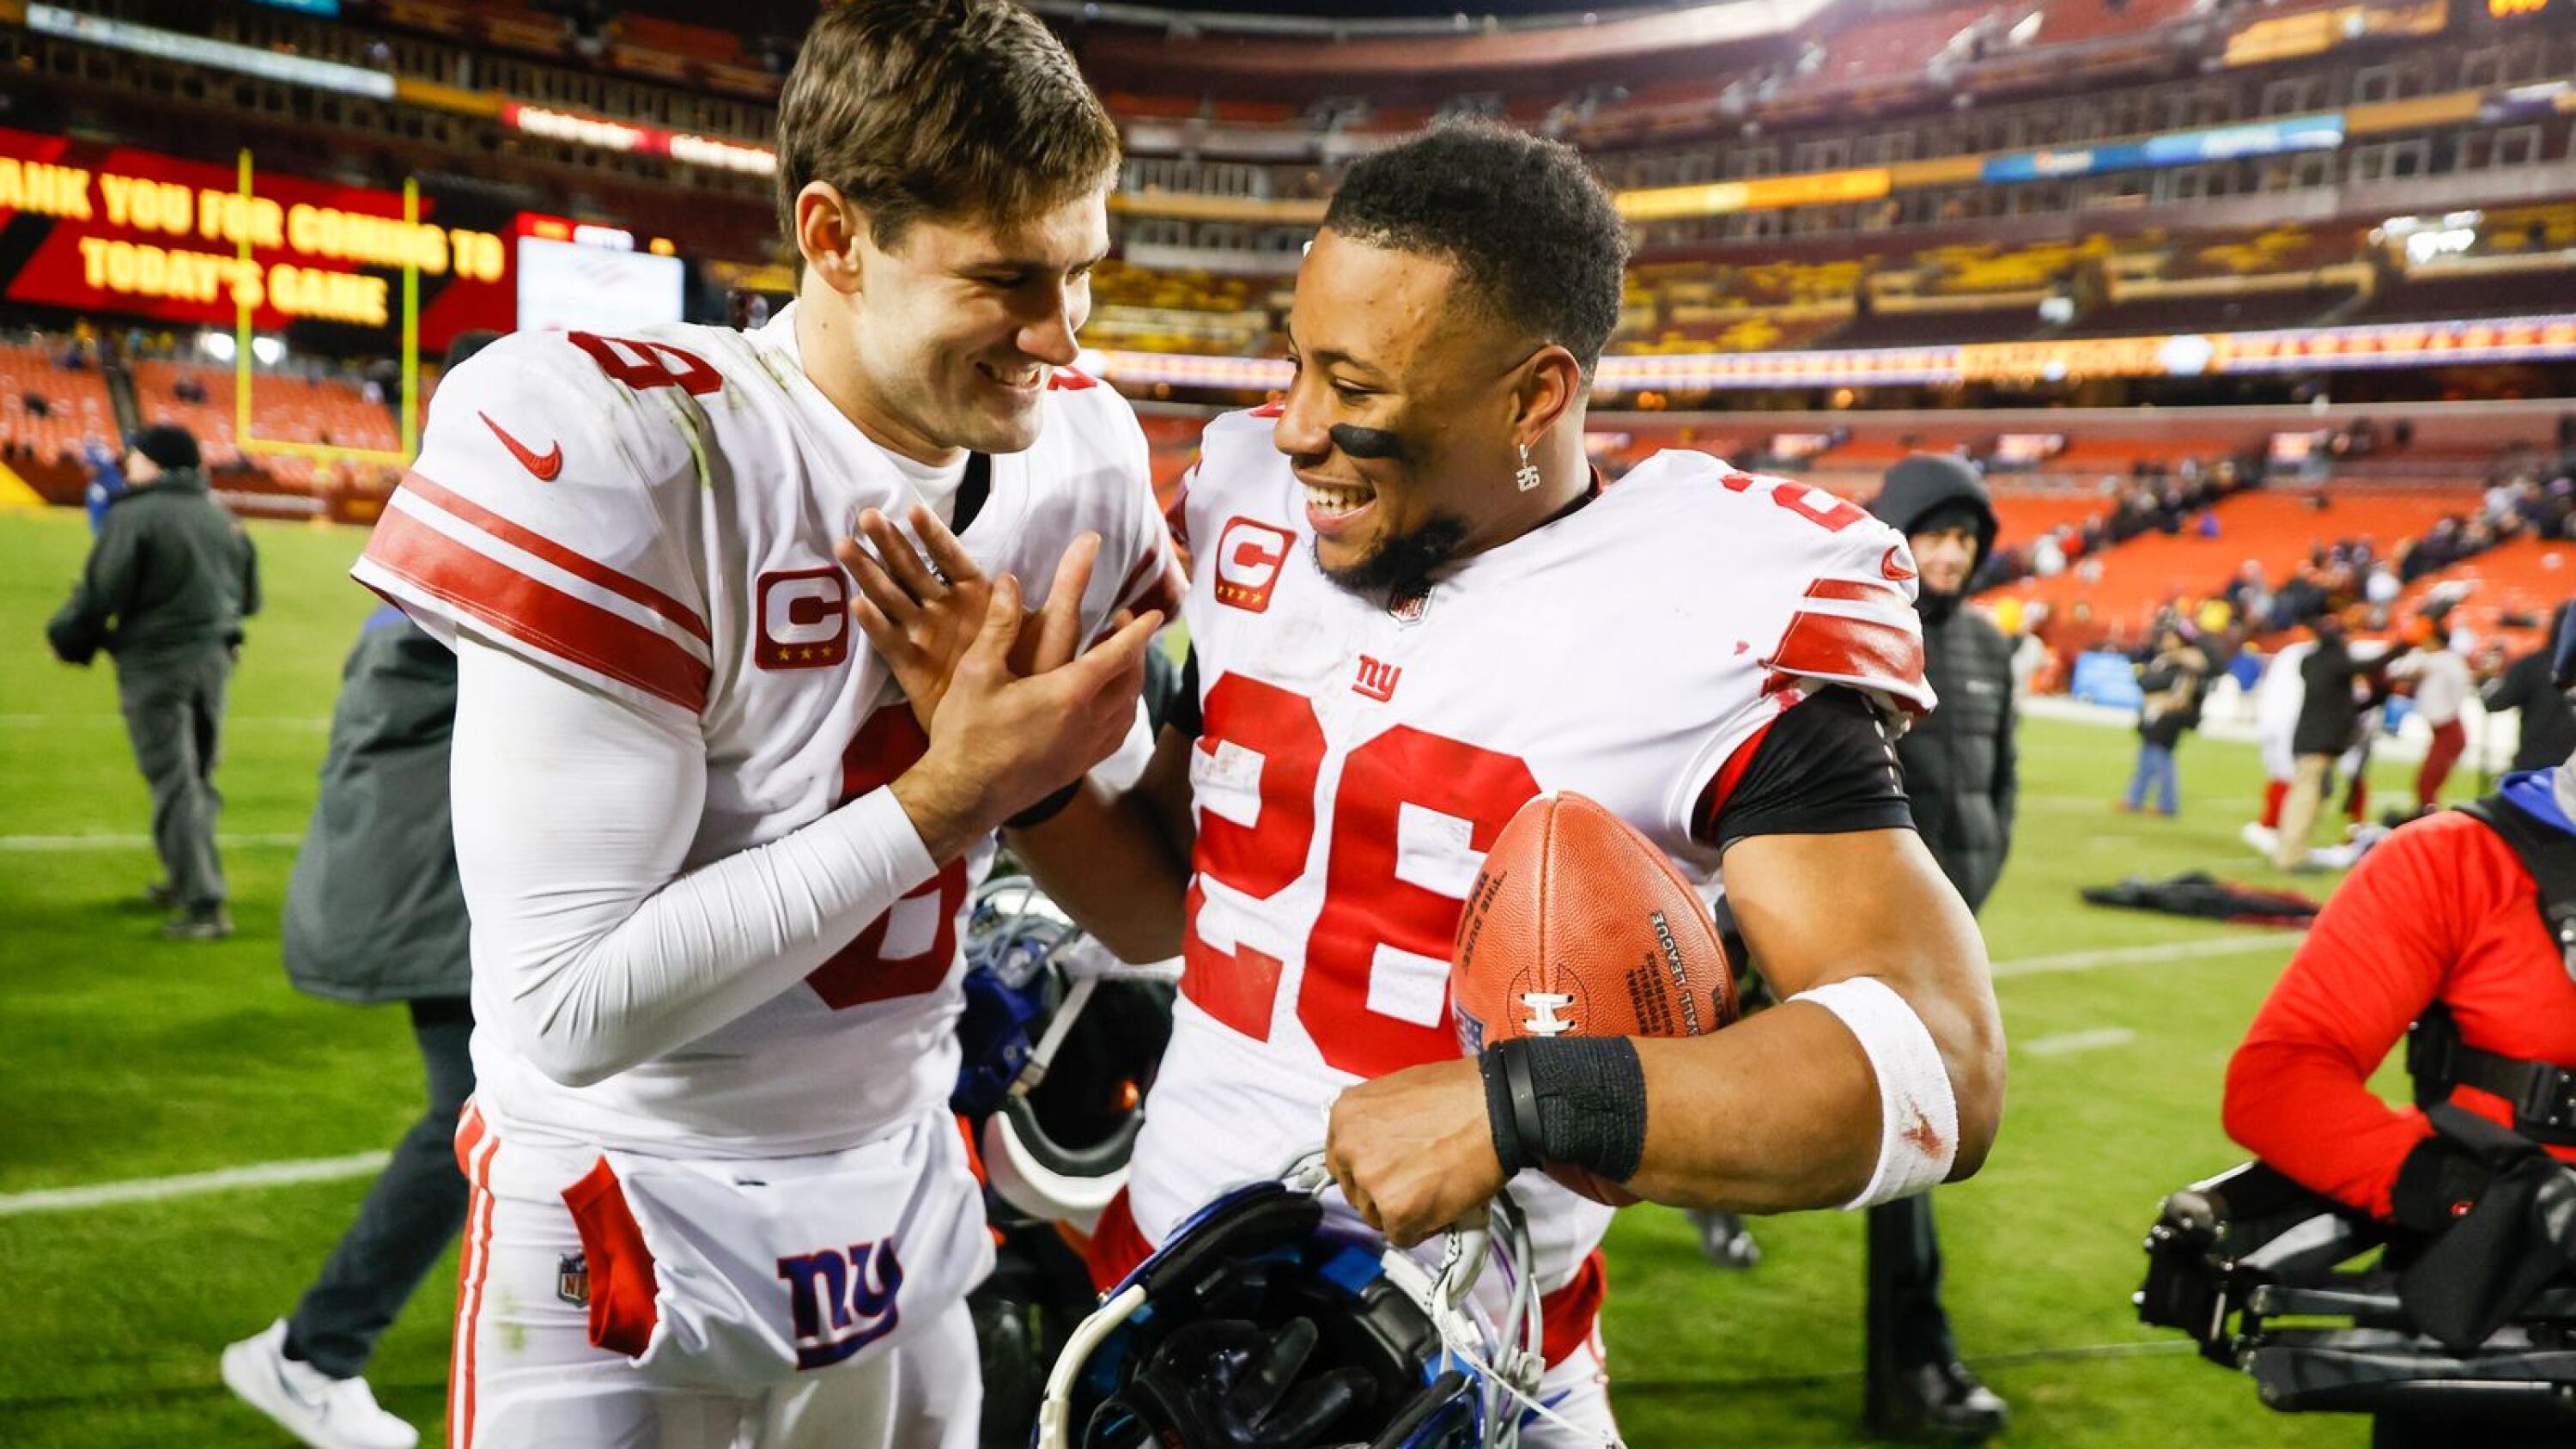 Giants' playoff hopes are brighter after win over Commanders